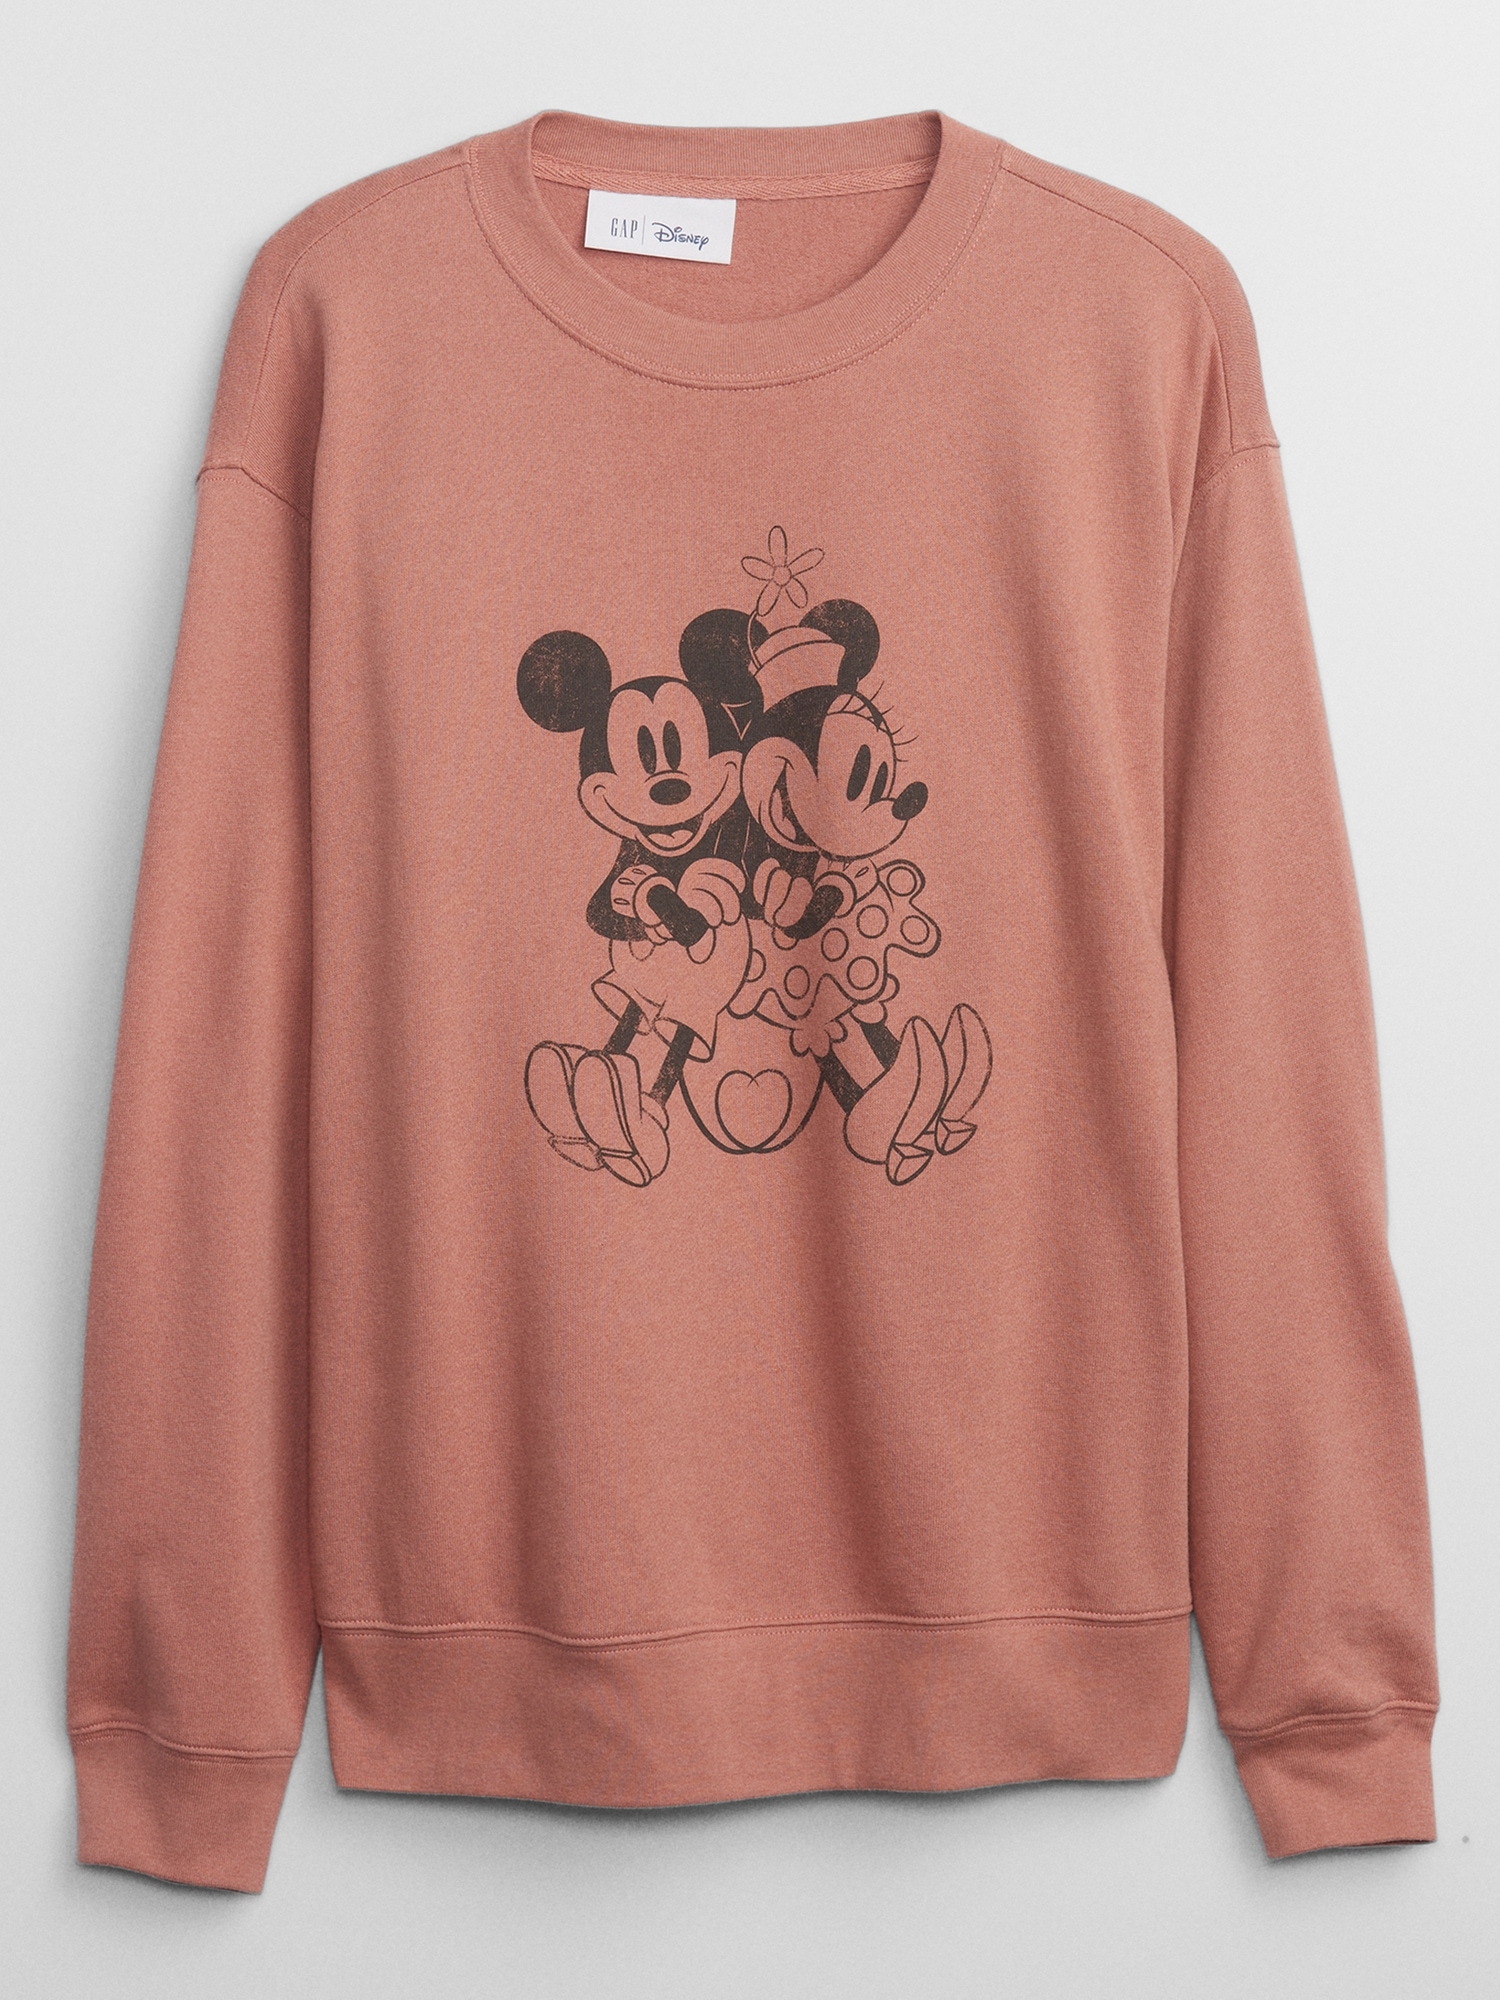 Shop Women MICKYMOUSE Disney Relaxed Graphic Sweatshirt - XL - 174